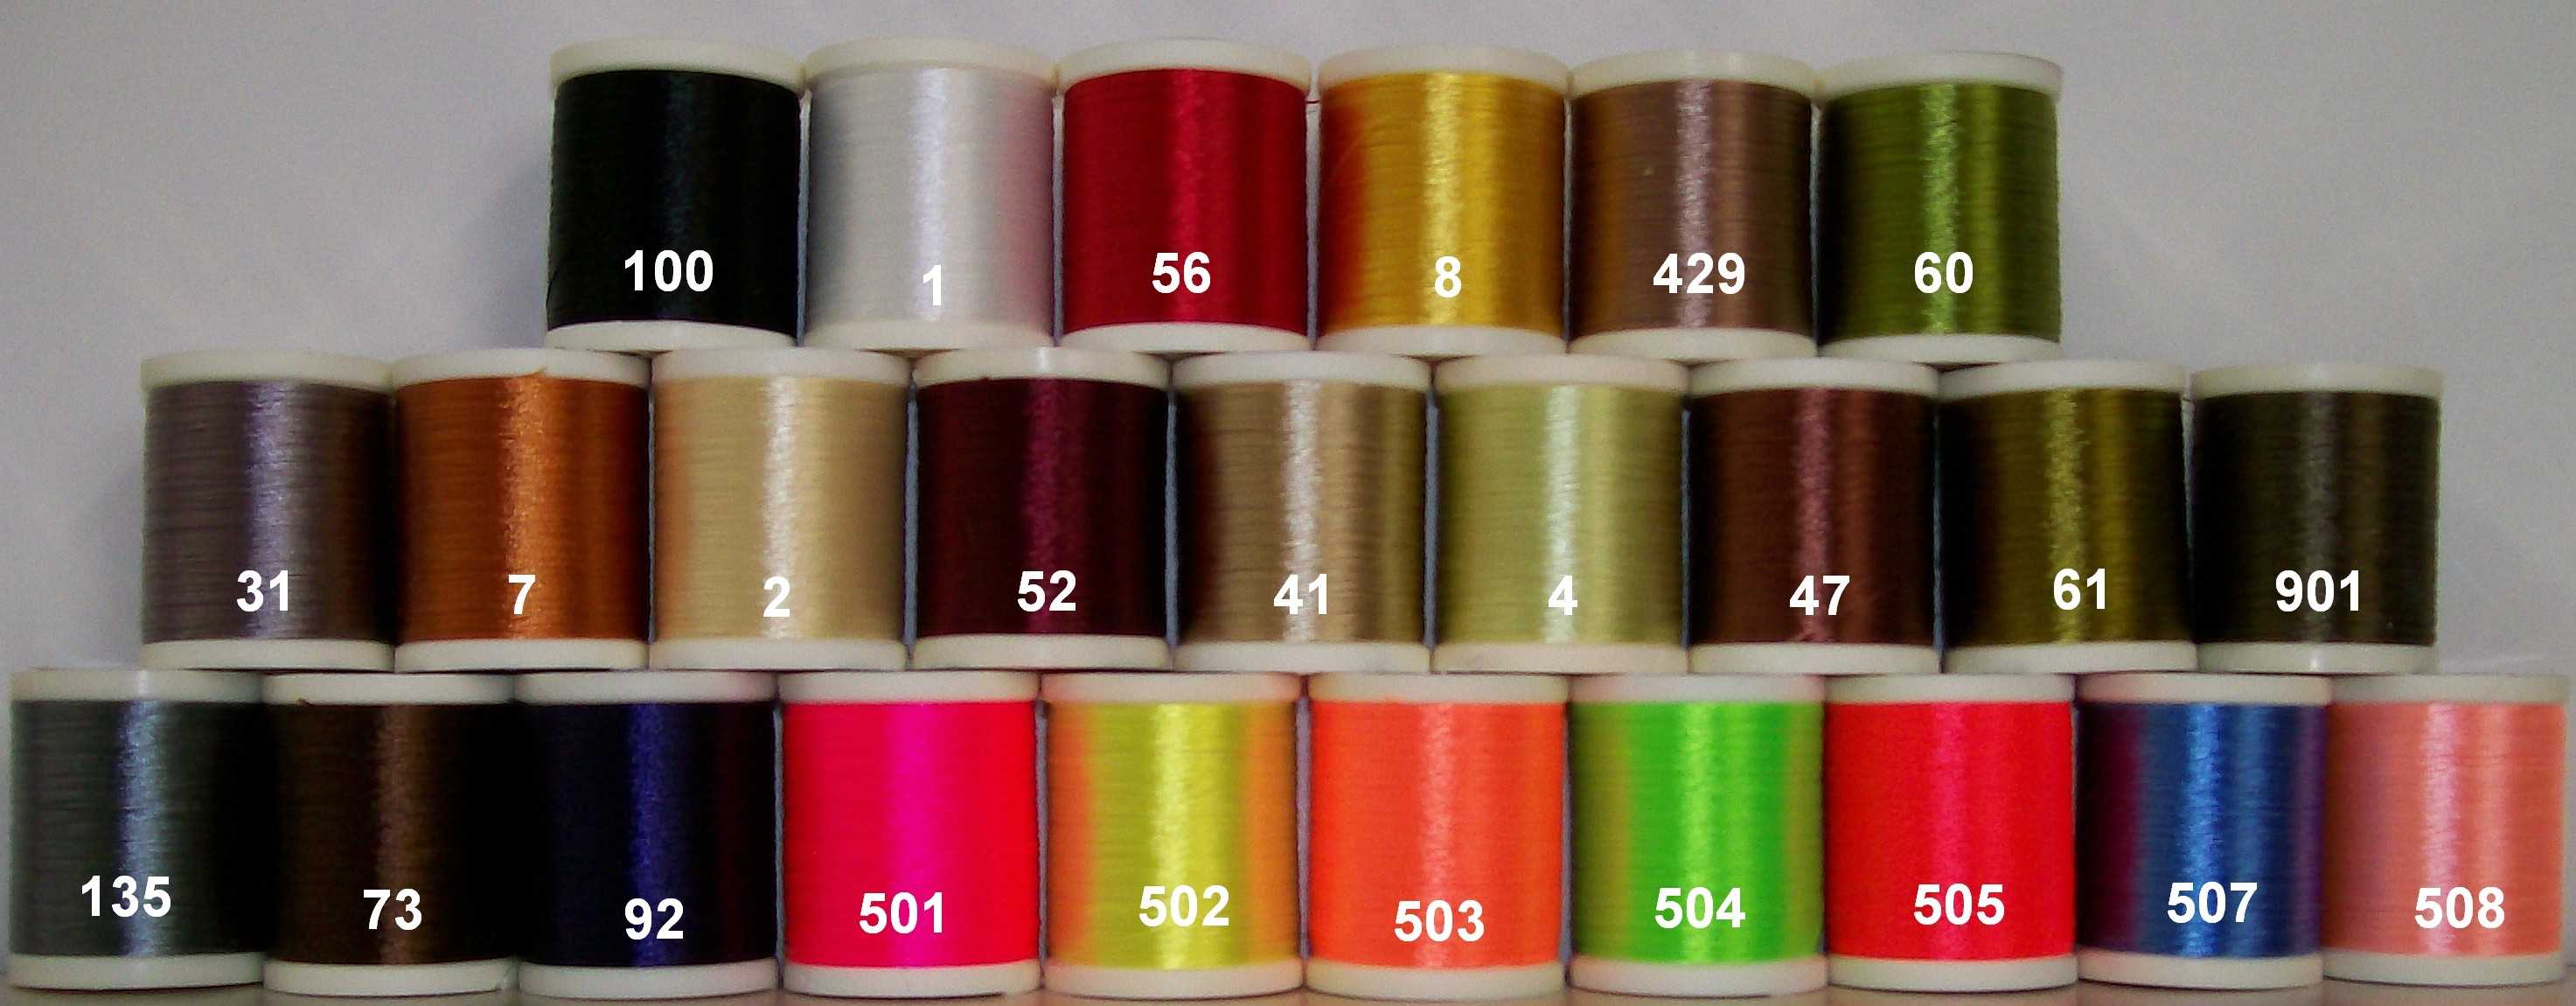 NYLON WOOL THREAD COMBO PACK FOR FLY & JIG TYING 8 SPOOLS OF DANVILLE'S FL 